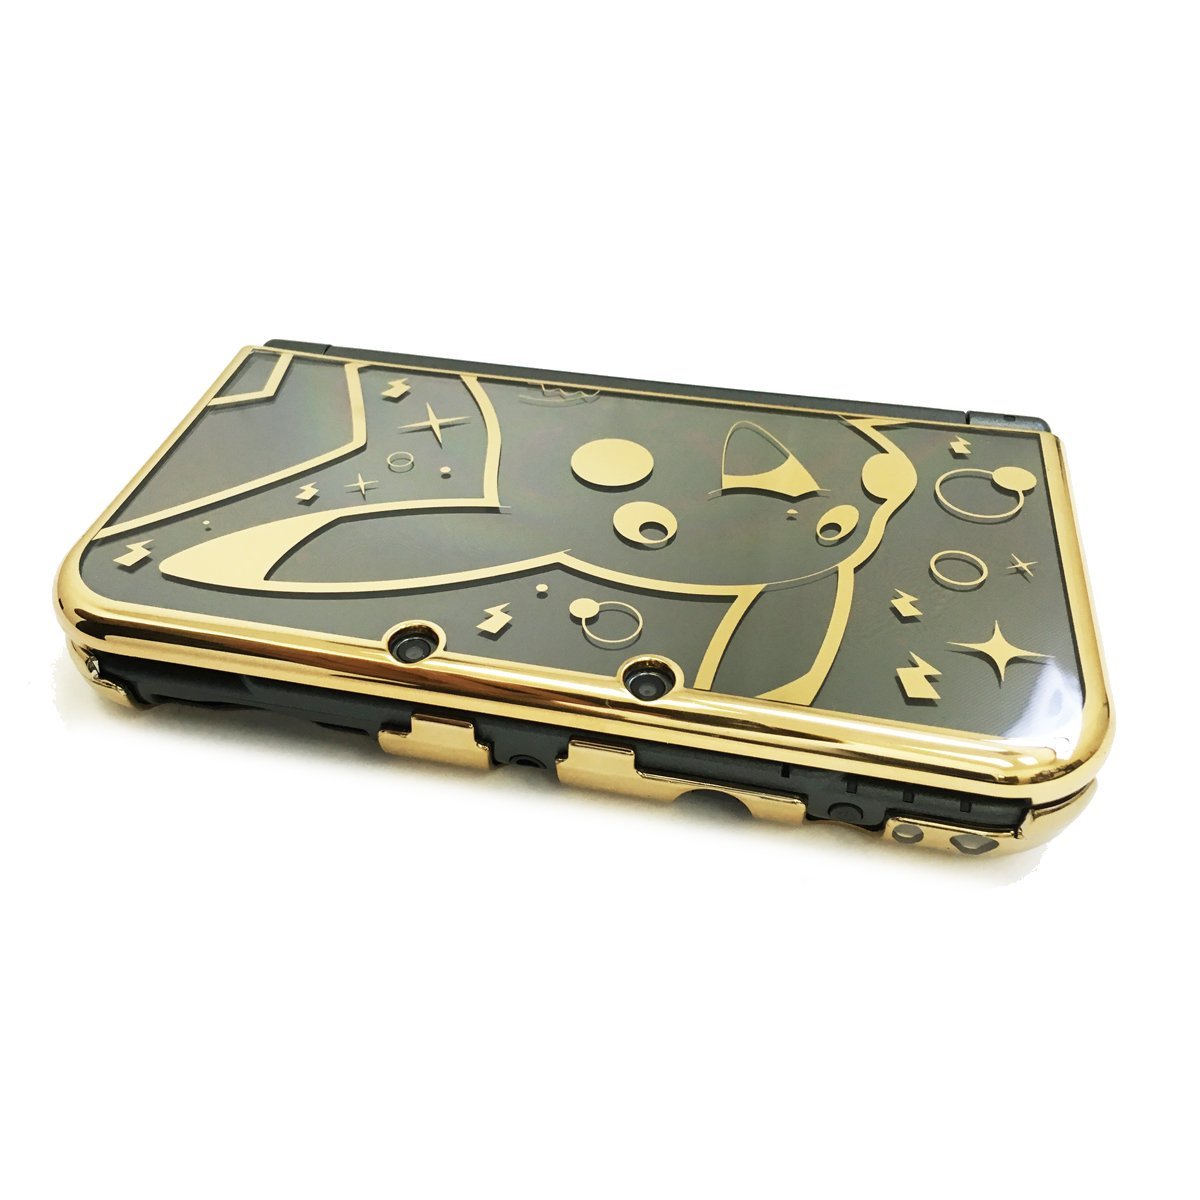 gold 3ds